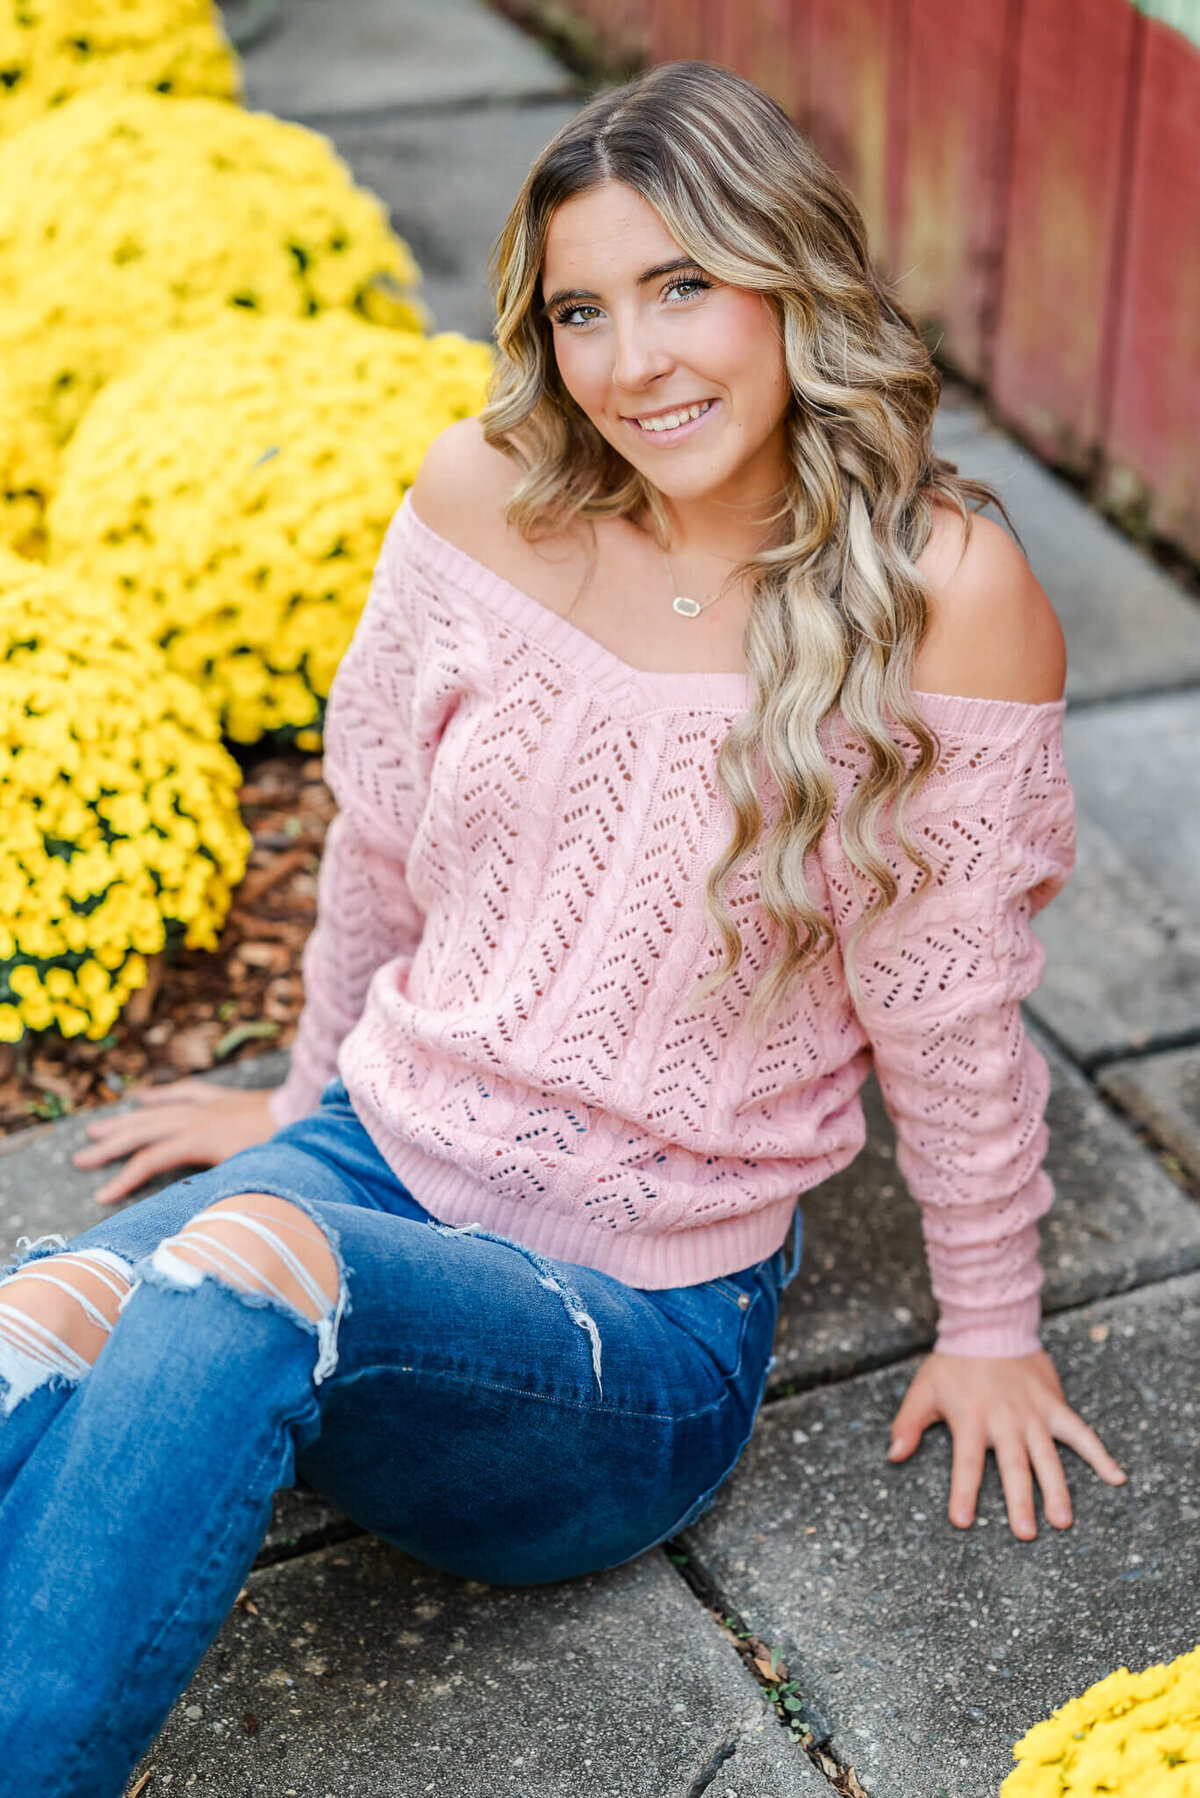 A high school senior, wearing jeans and a pink sweater, sits on some paving stones near some yellow mum bushes.